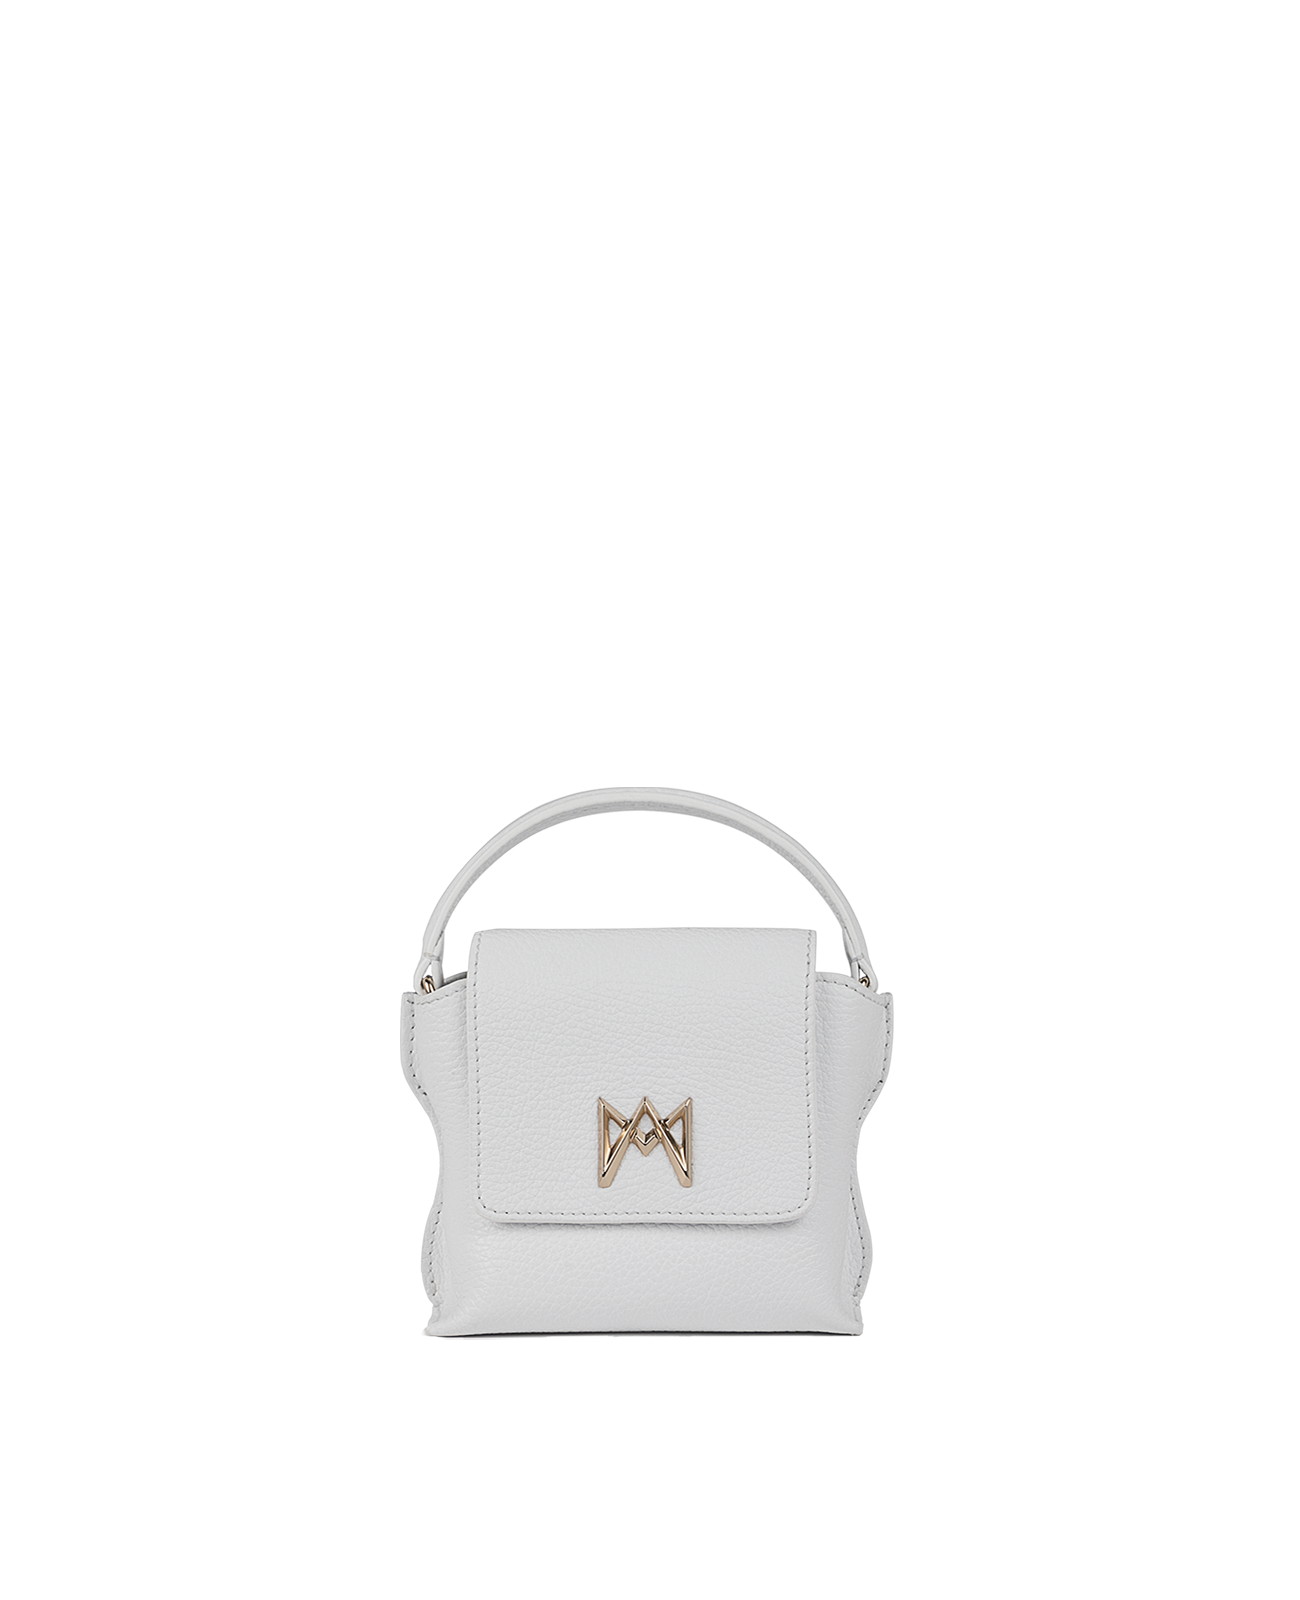 Cross-body bag in Italian full-grain leather, semi-aniline calf Italian leather with detachable shoulder strap.Three compartments, zip pocket in the back compartment. Magnetic flap closure with logo. Color: White. Size:Mini